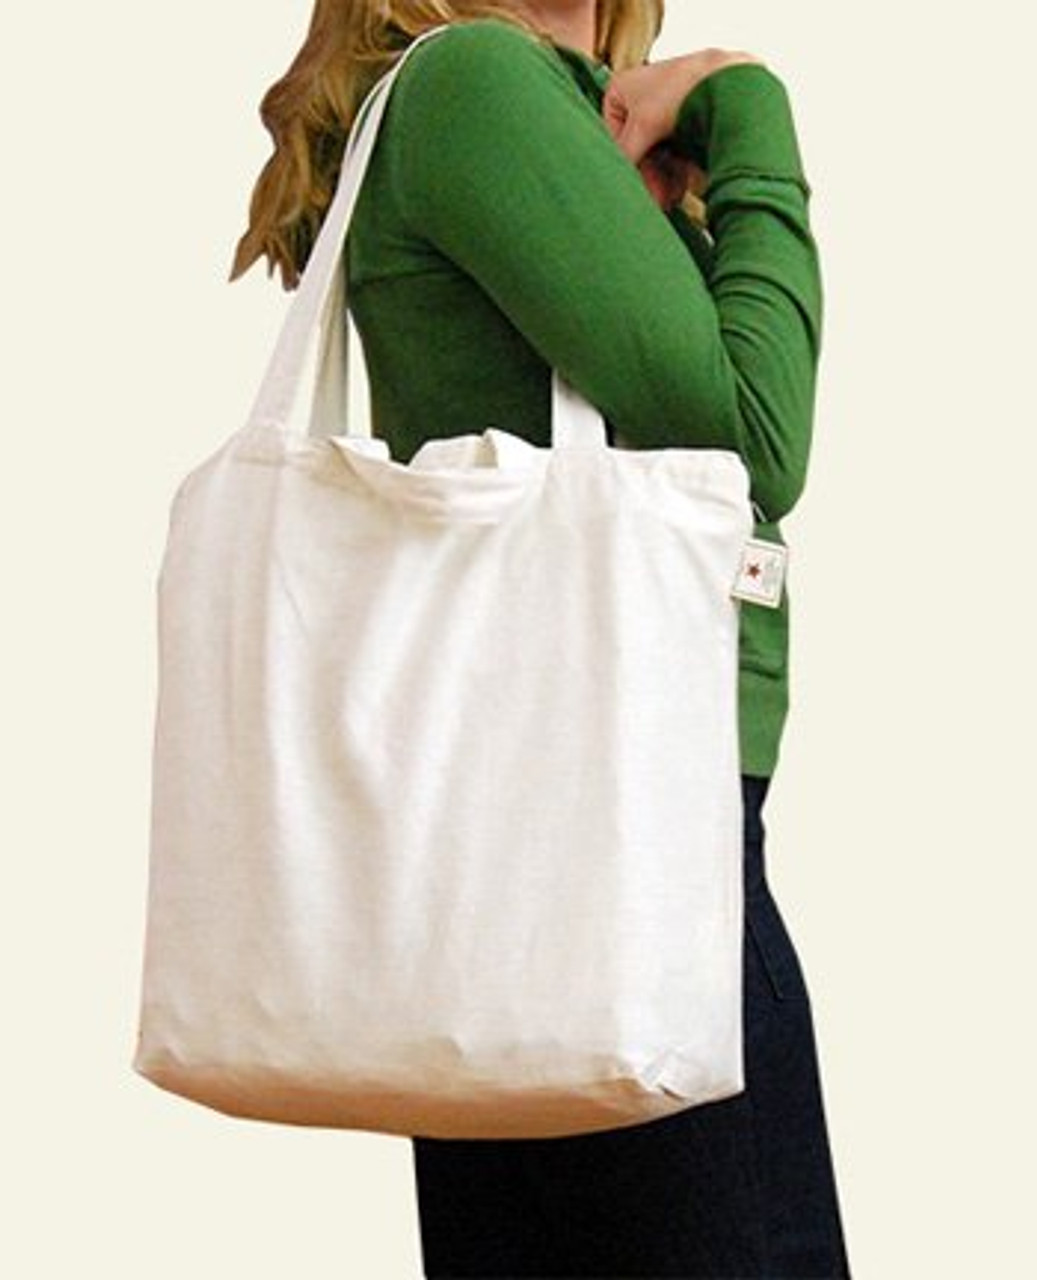 Blank Reusable Grocery Tote Bags